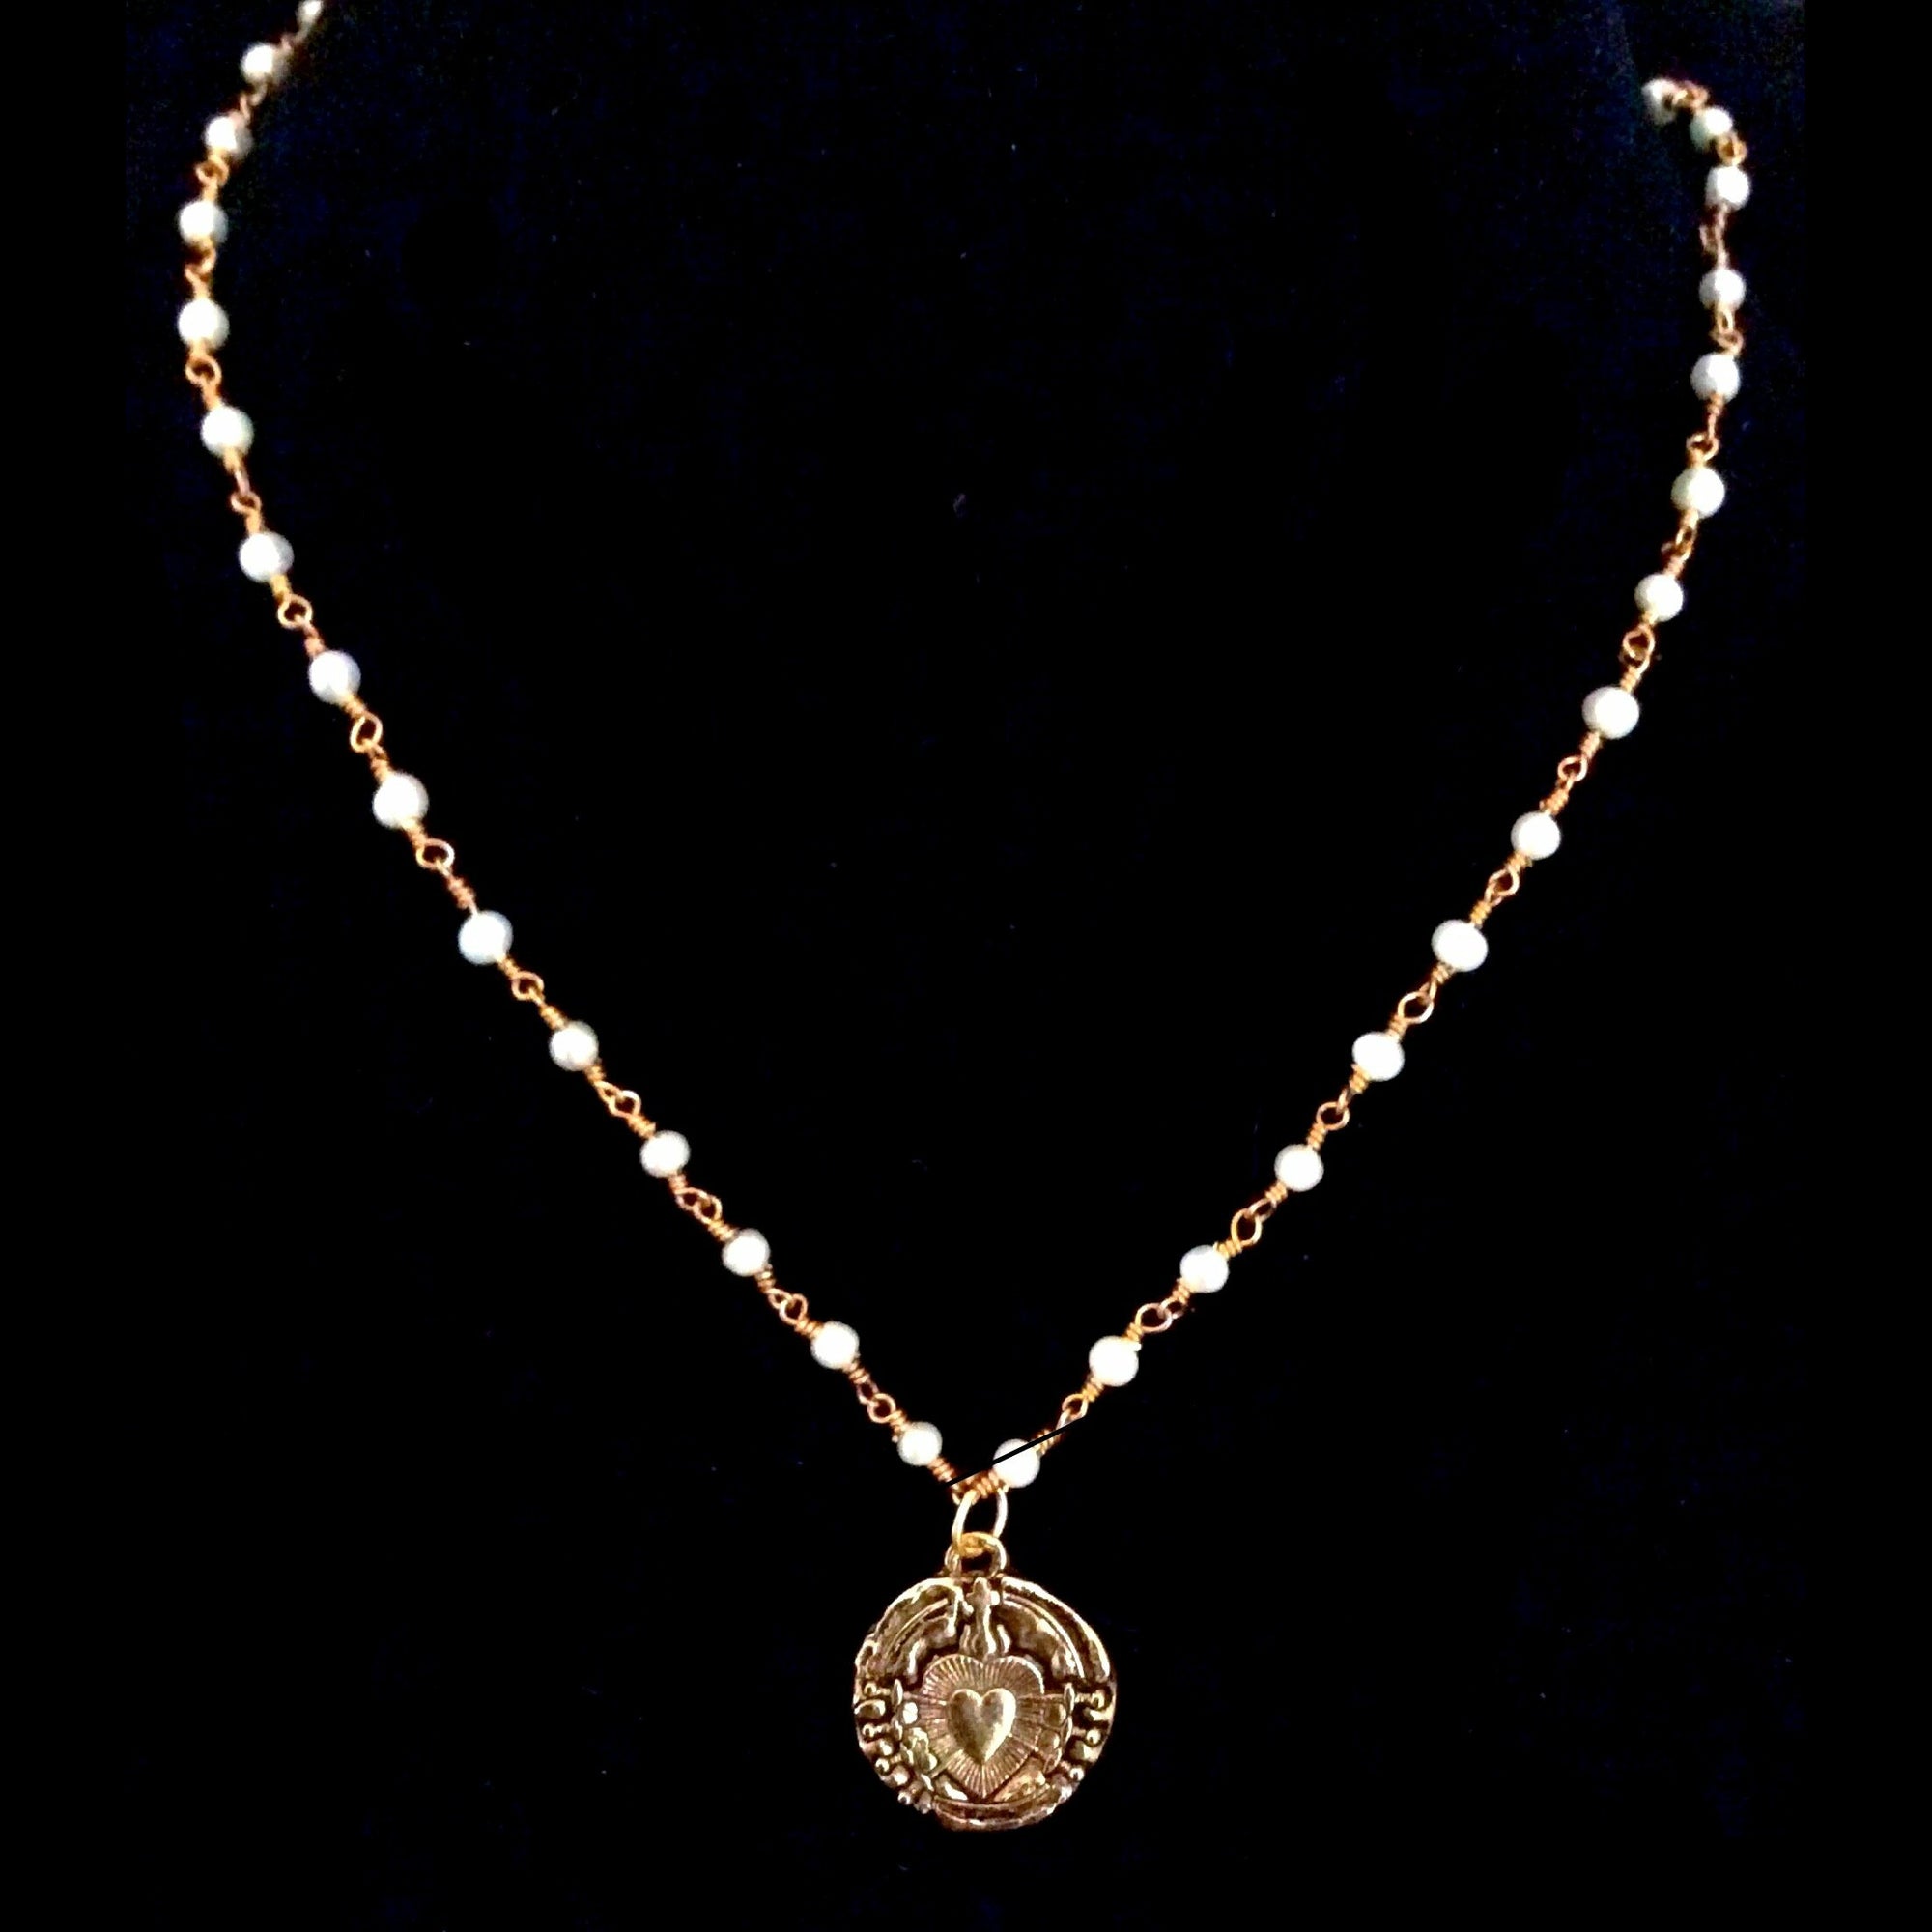 Immaculate Heart with Swords of Seven Sorrows Freshwater Pearl Necklace in Silver by Whispering Goddess